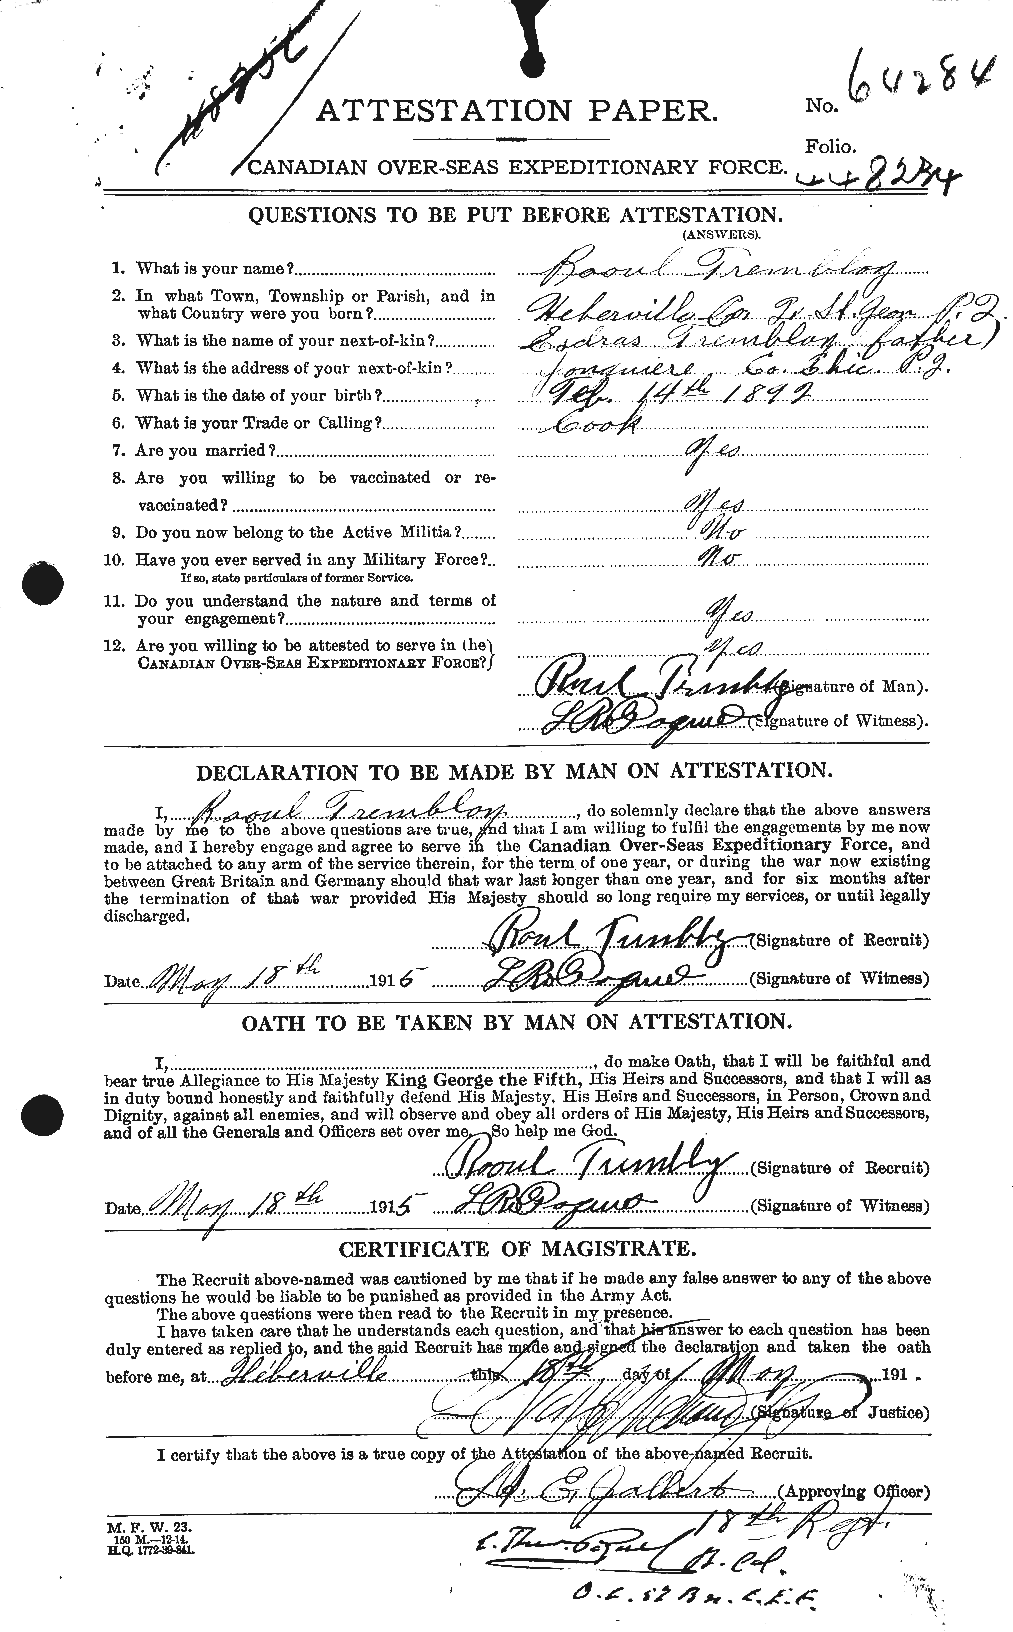 Personnel Records of the First World War - CEF 639247a